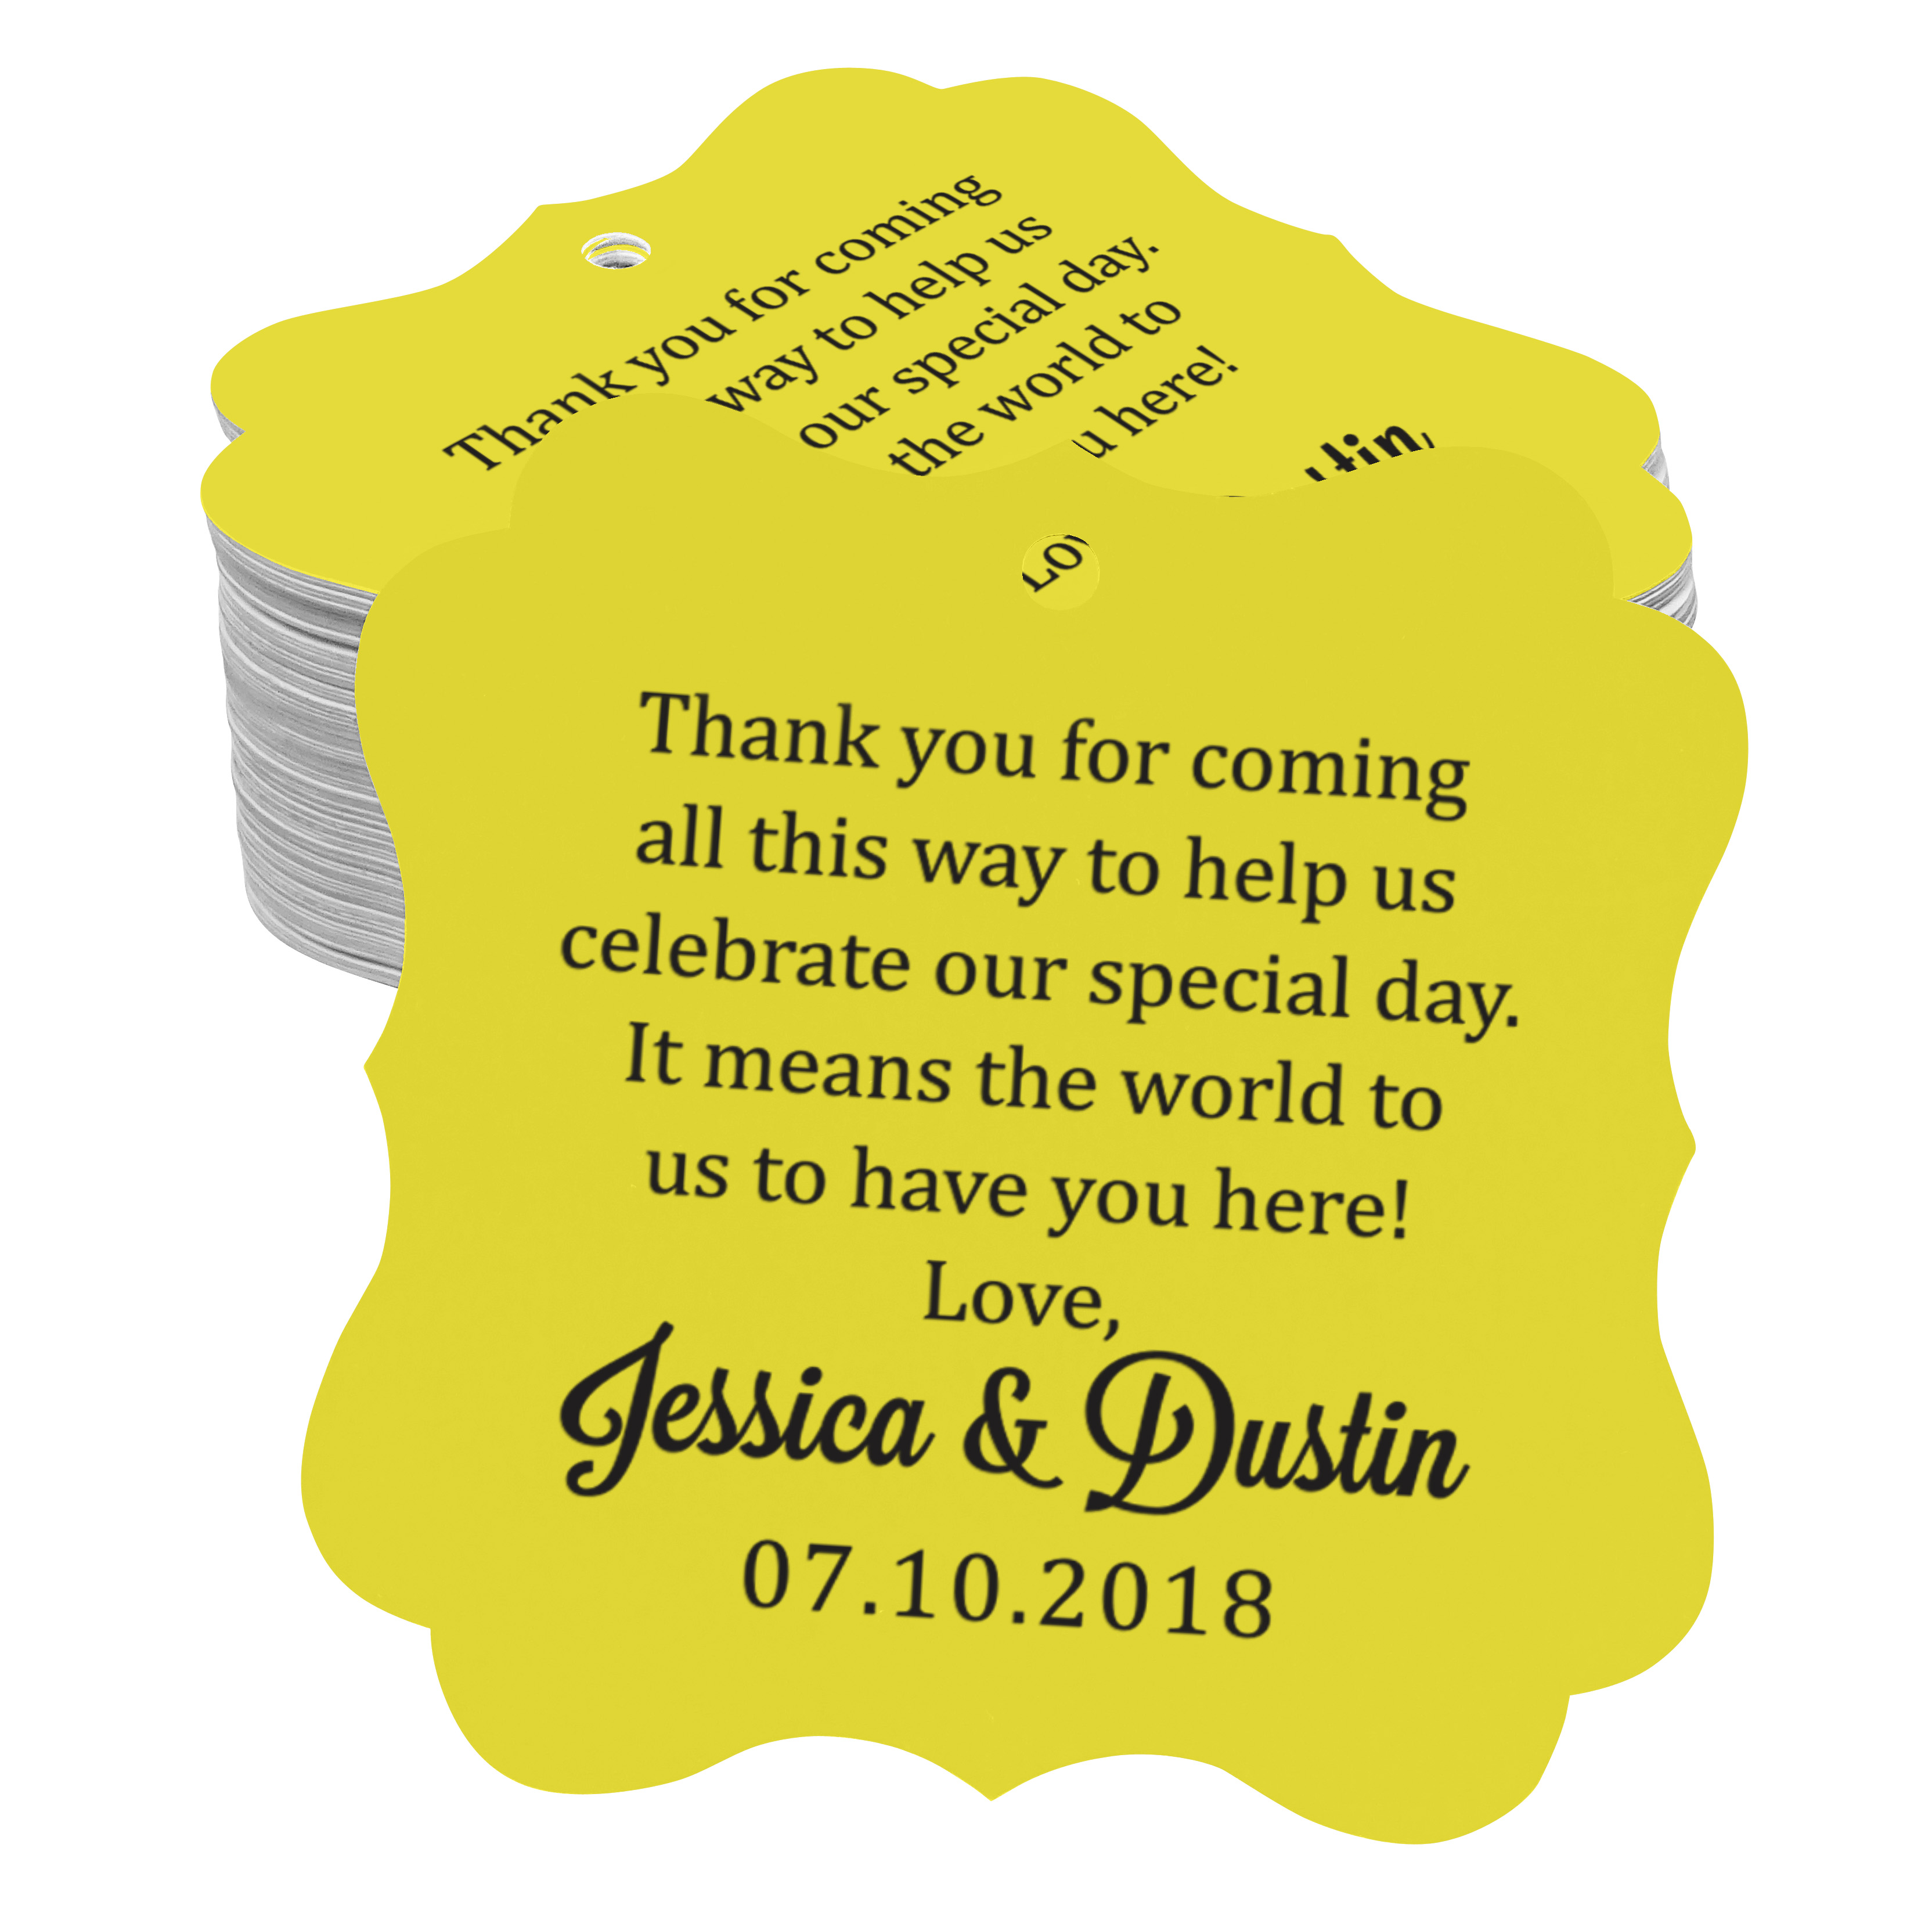 Details about   Paper Tags Message Cards Thank You Notes Favors Hang Tags for Thanksgiving JJ 